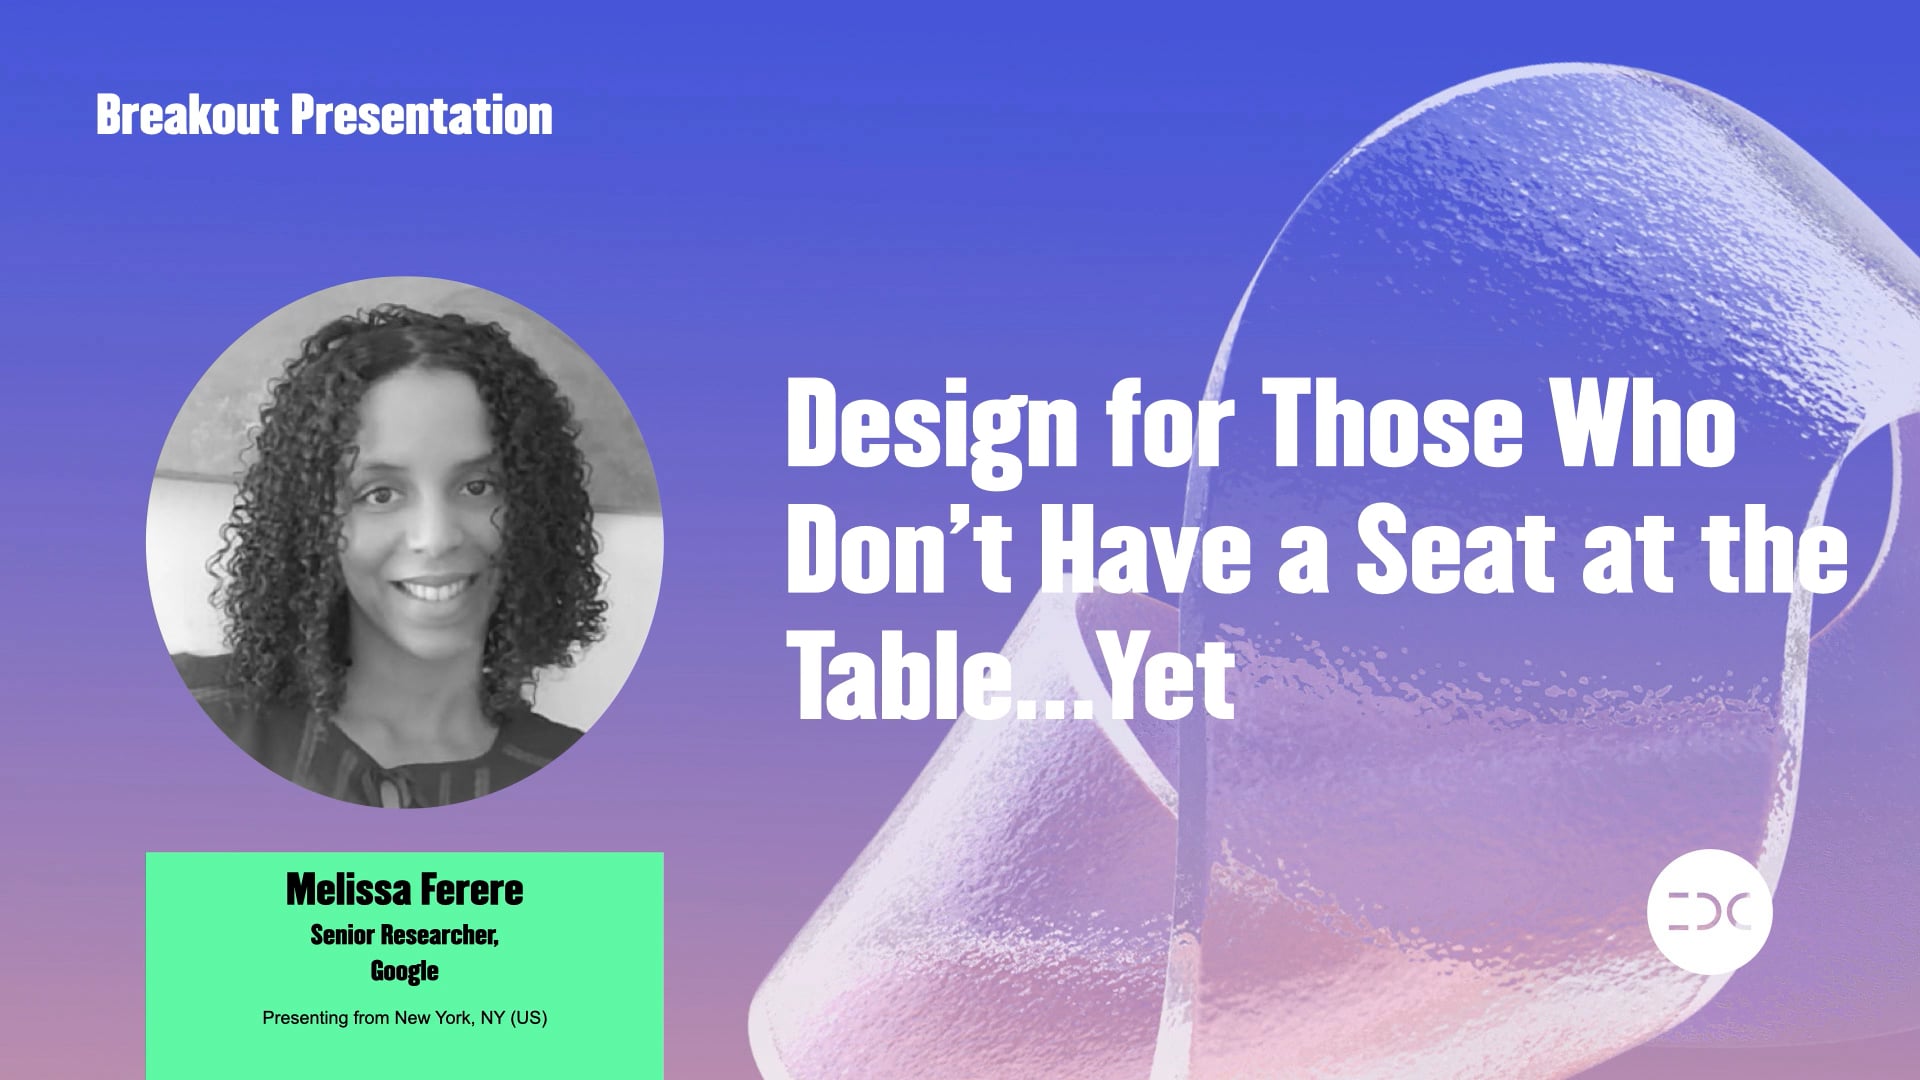 IDC 2021 - Melissa Ferere - Design for Those Who Don't Have a Seat at the Table ... Yet